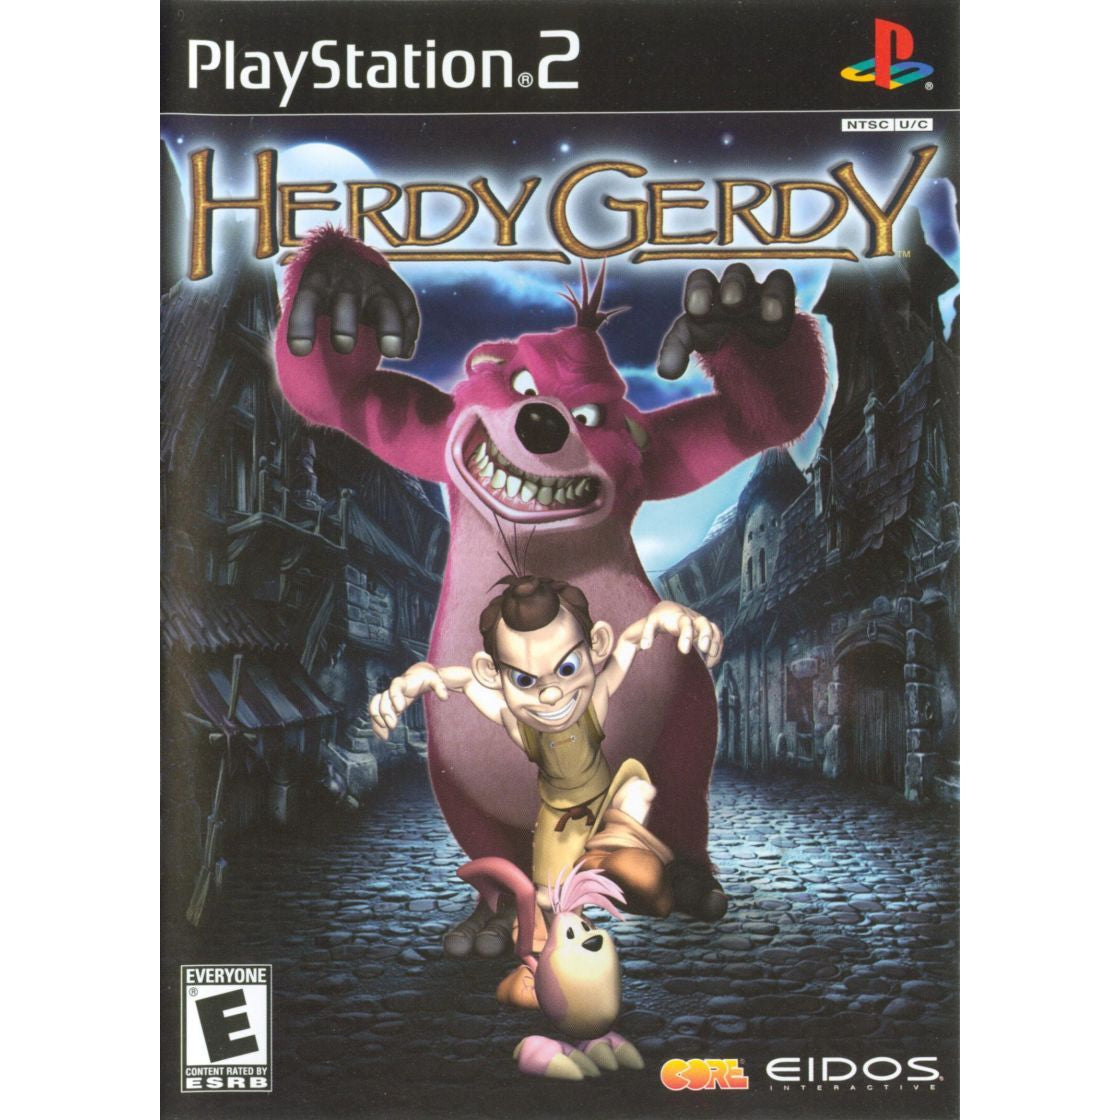 Herdy Gerdy - PlayStation 2 (PS2) Game Complete - YourGamingShop.com - Buy, Sell, Trade Video Games Online. 120 Day Warranty. Satisfaction Guaranteed.